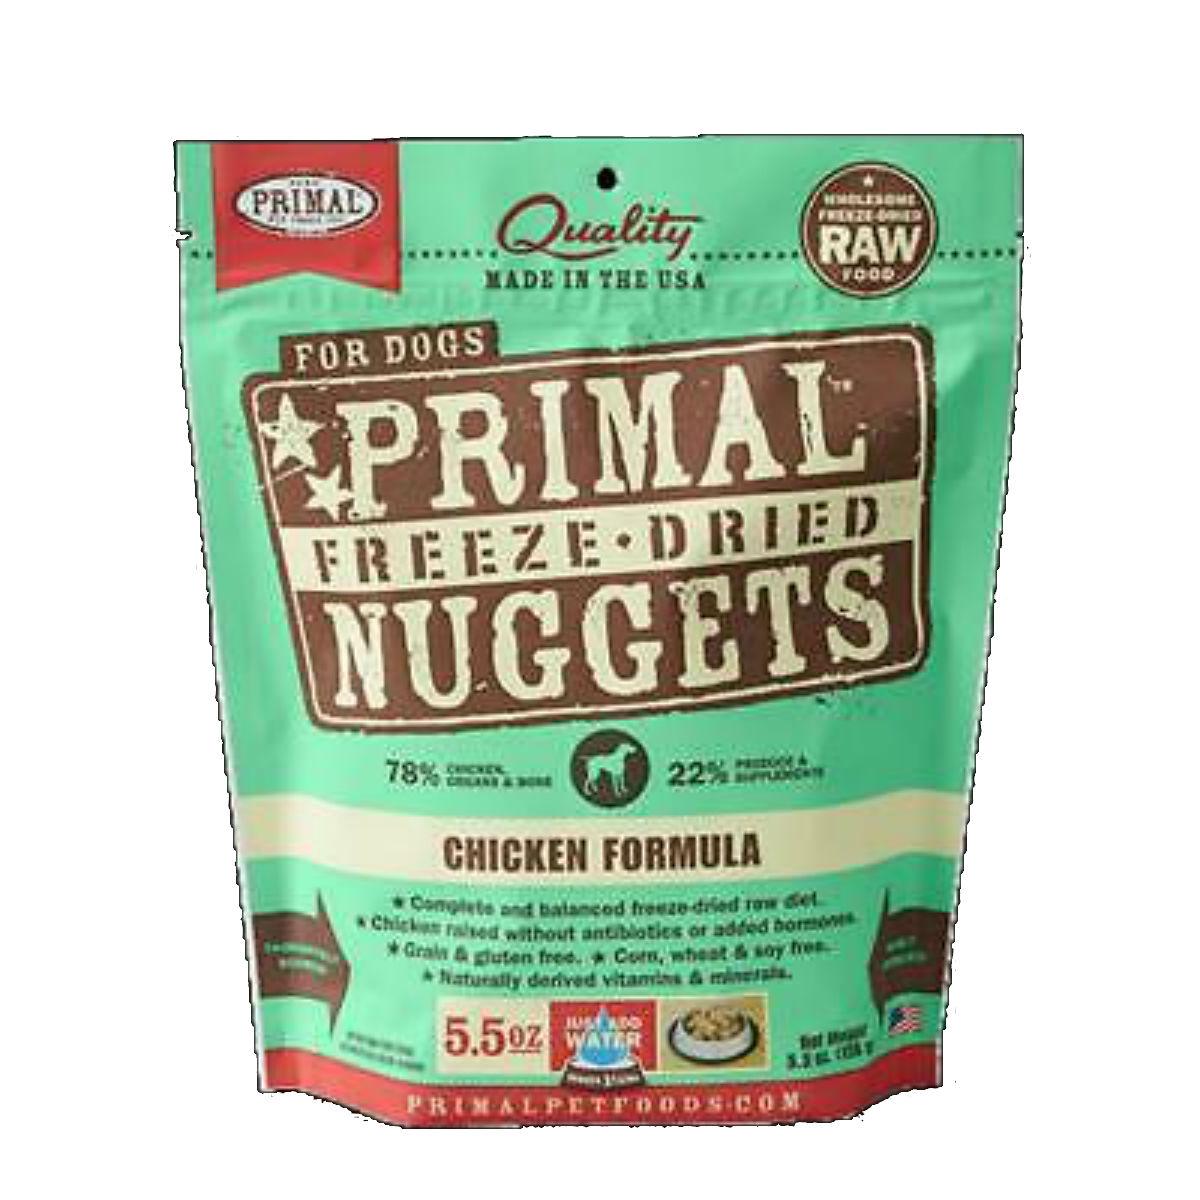 Primal Canine Freeze Dried Nuggets Dog Treats - Chicken